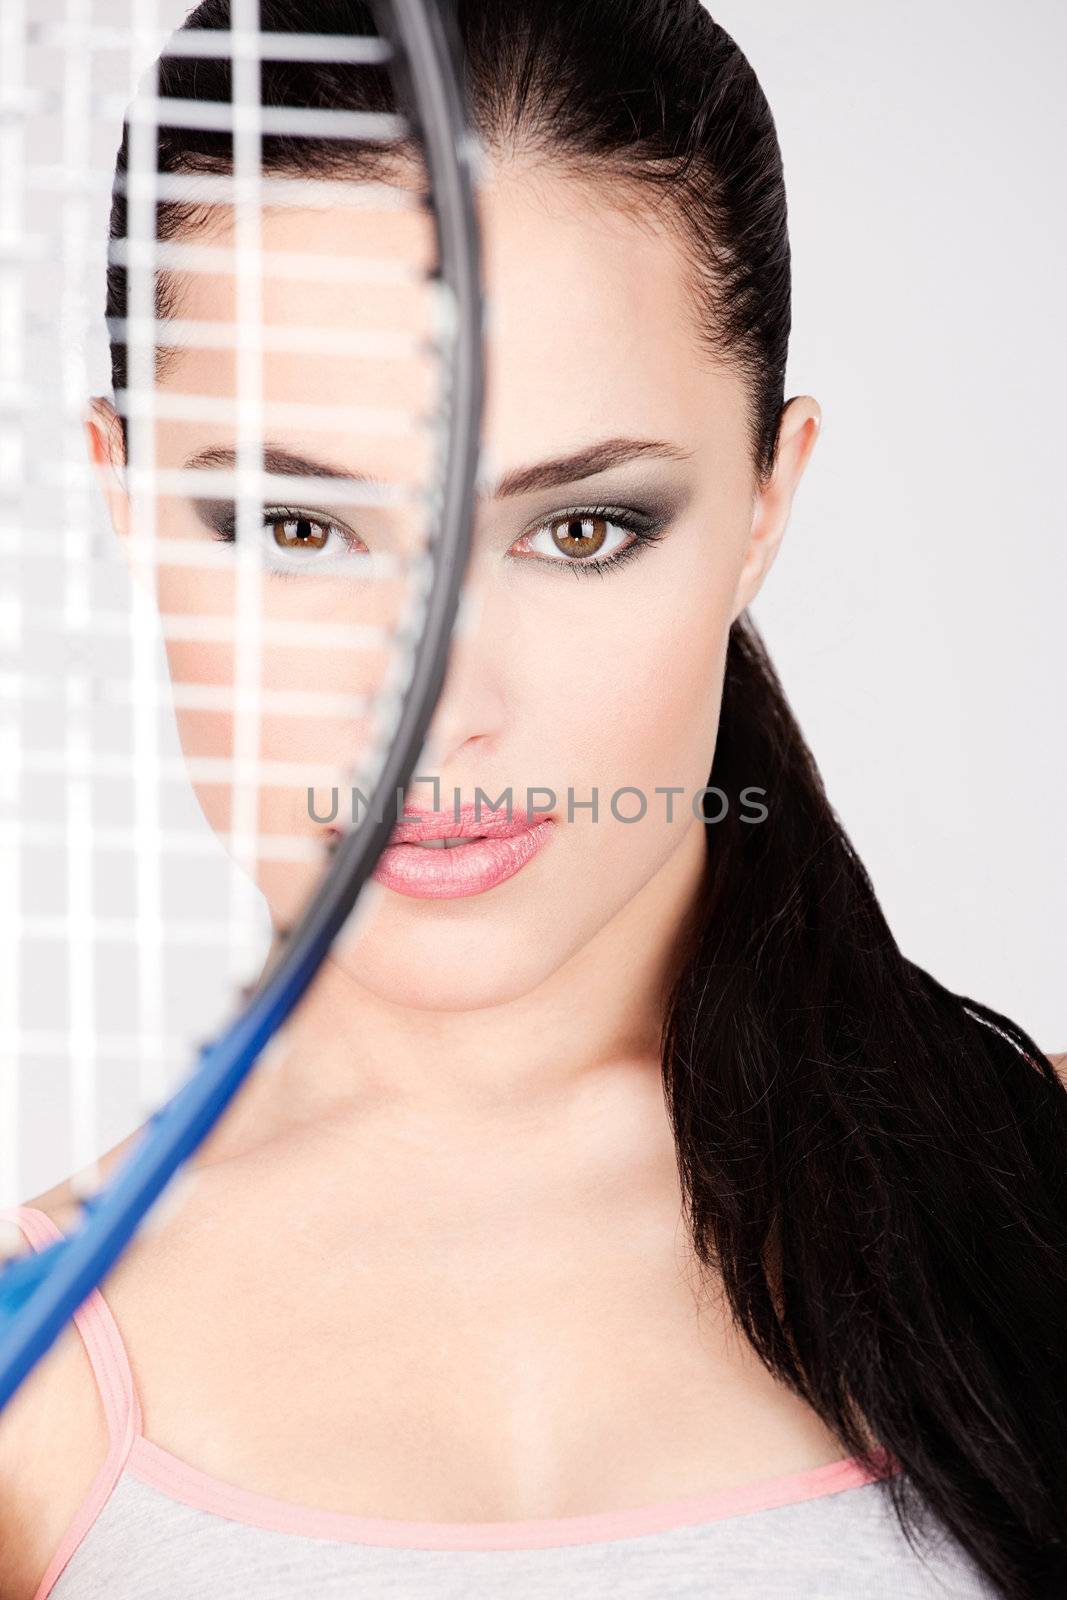 Pretty woman with tennis racket by imarin